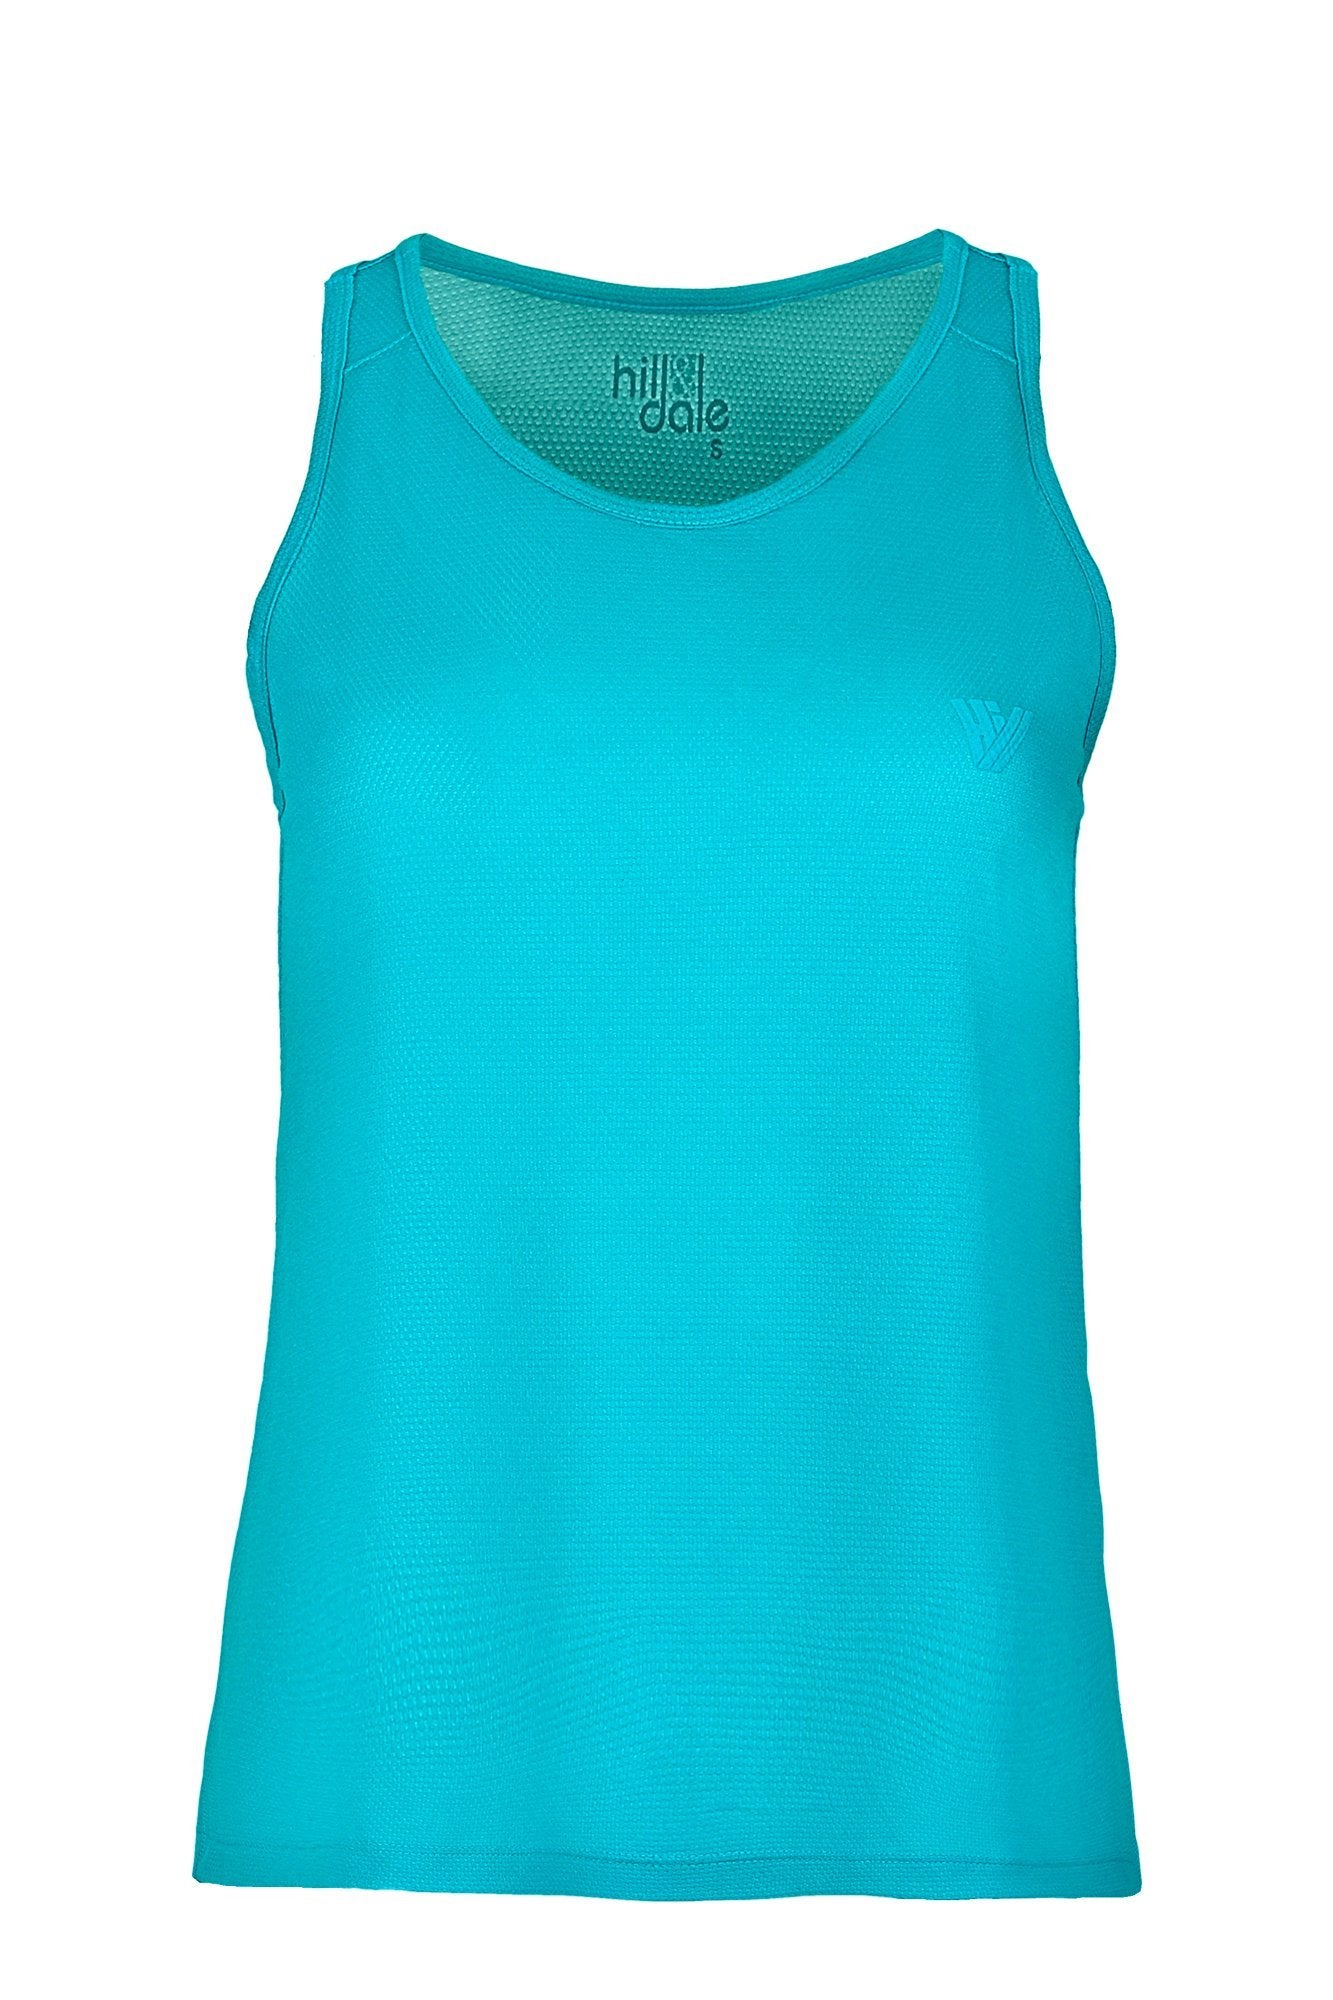 hill & dale run singlet top hill & dale turquoise XS 100% Polyester